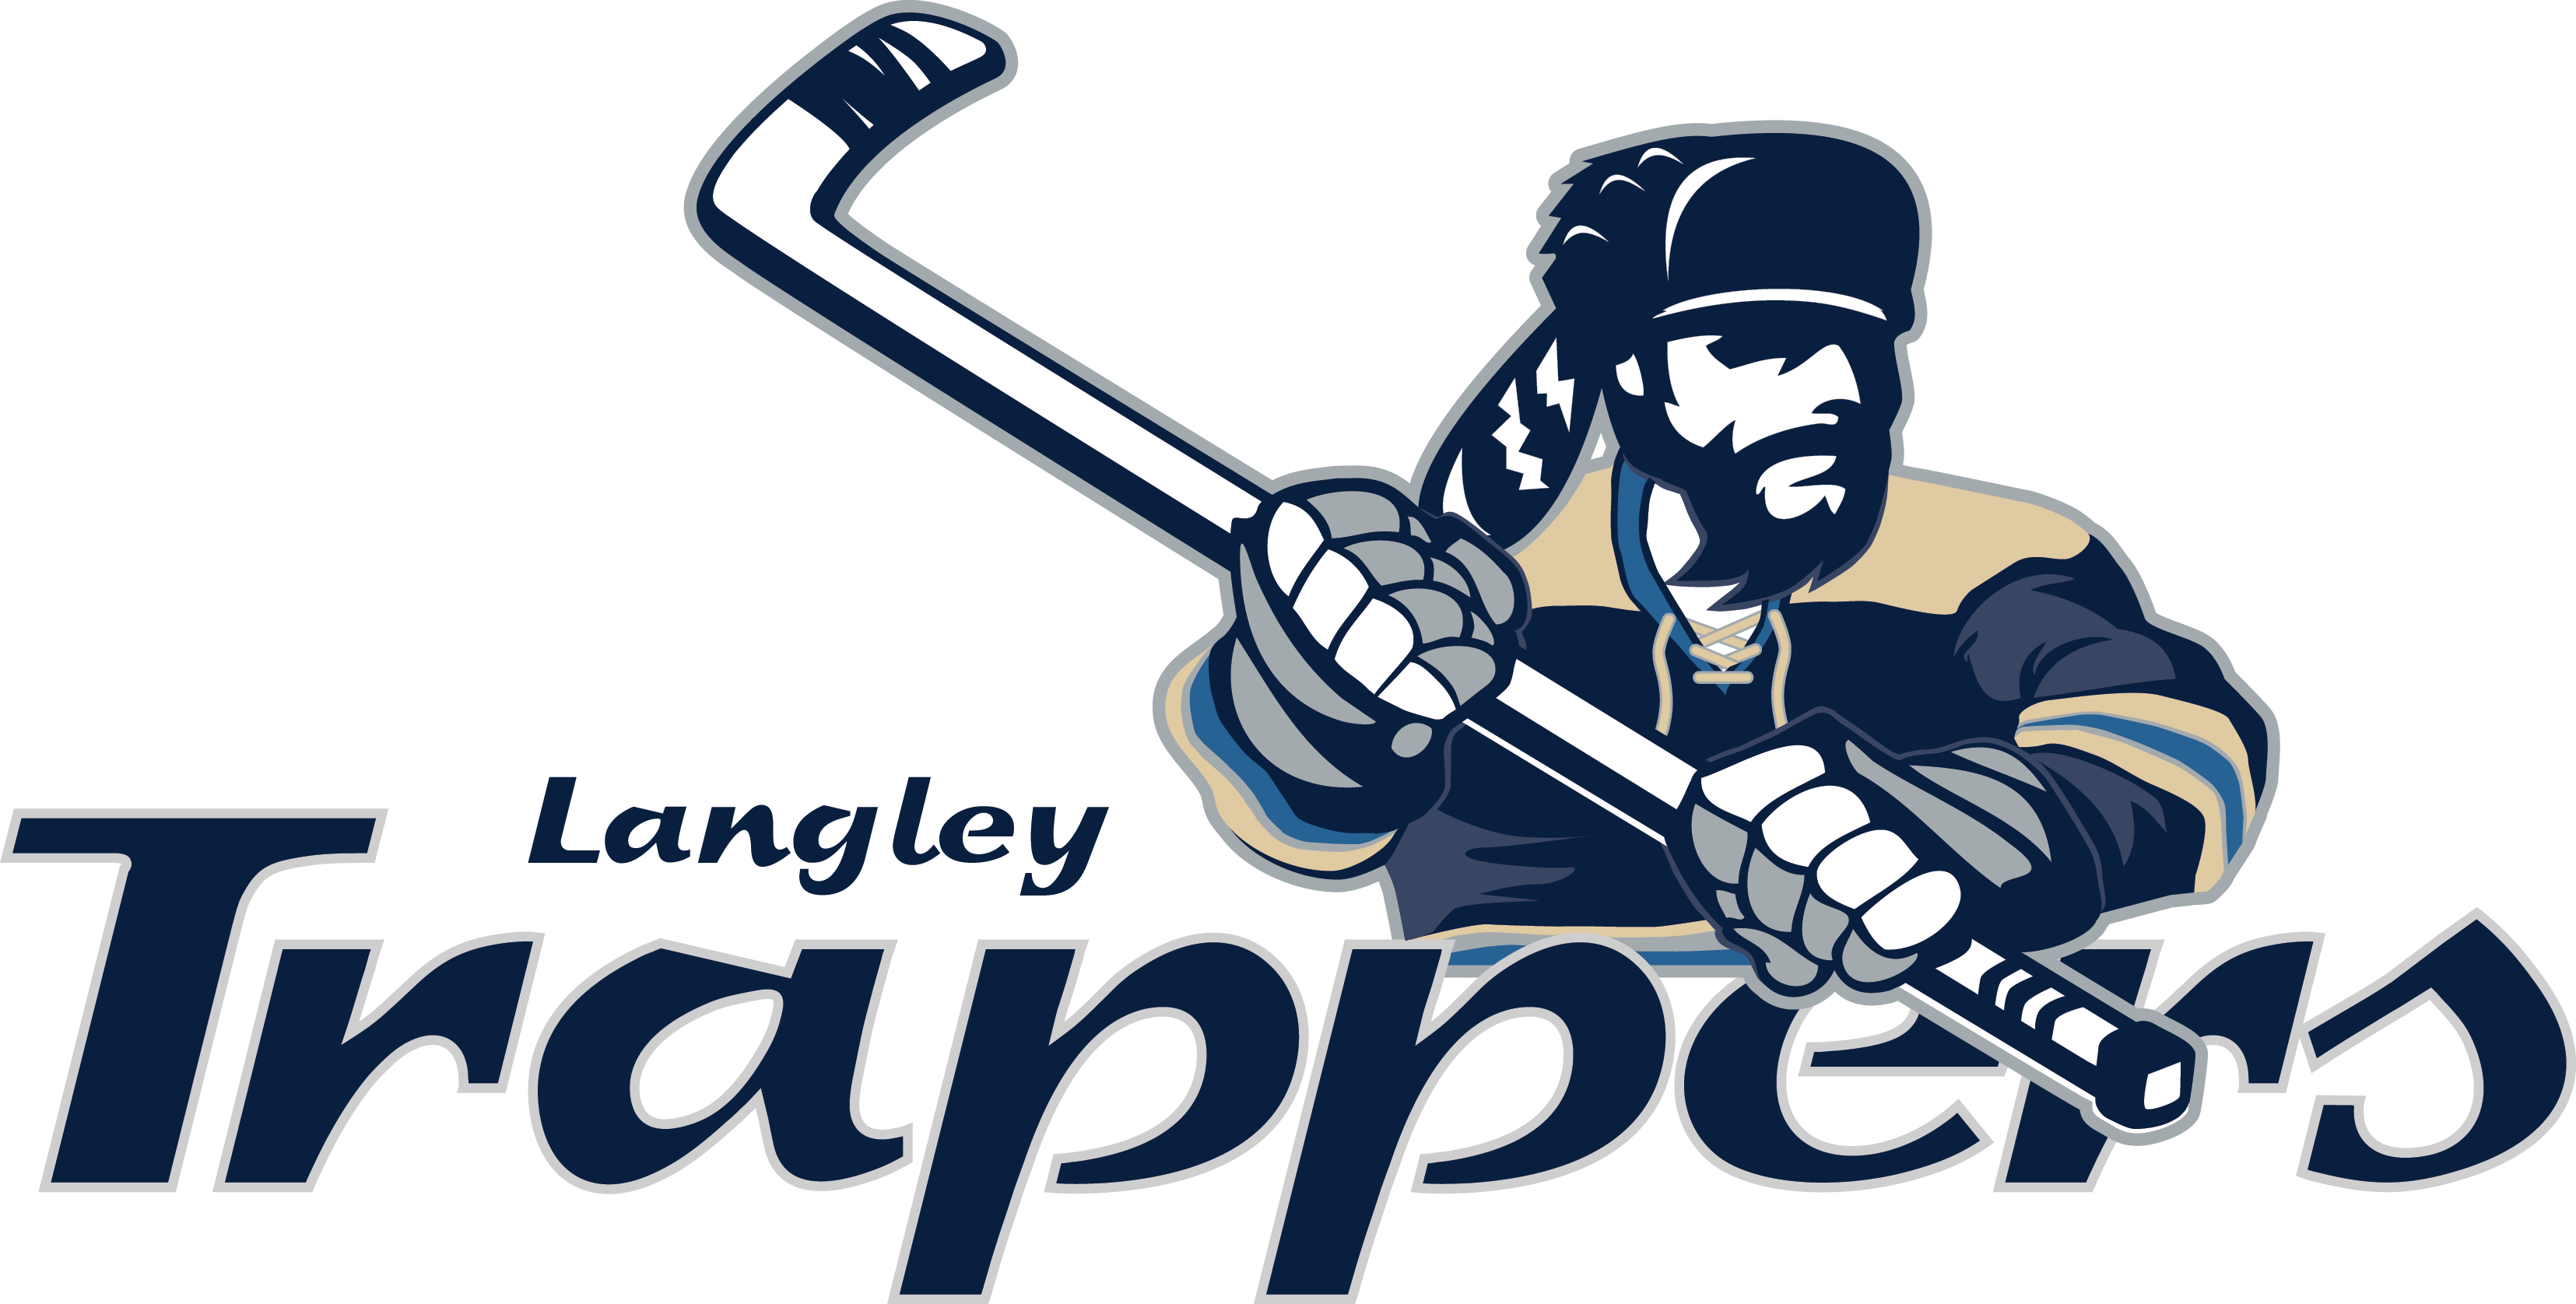 Trappers Logo - Langley Trappers - Powered By esportsdesk.com